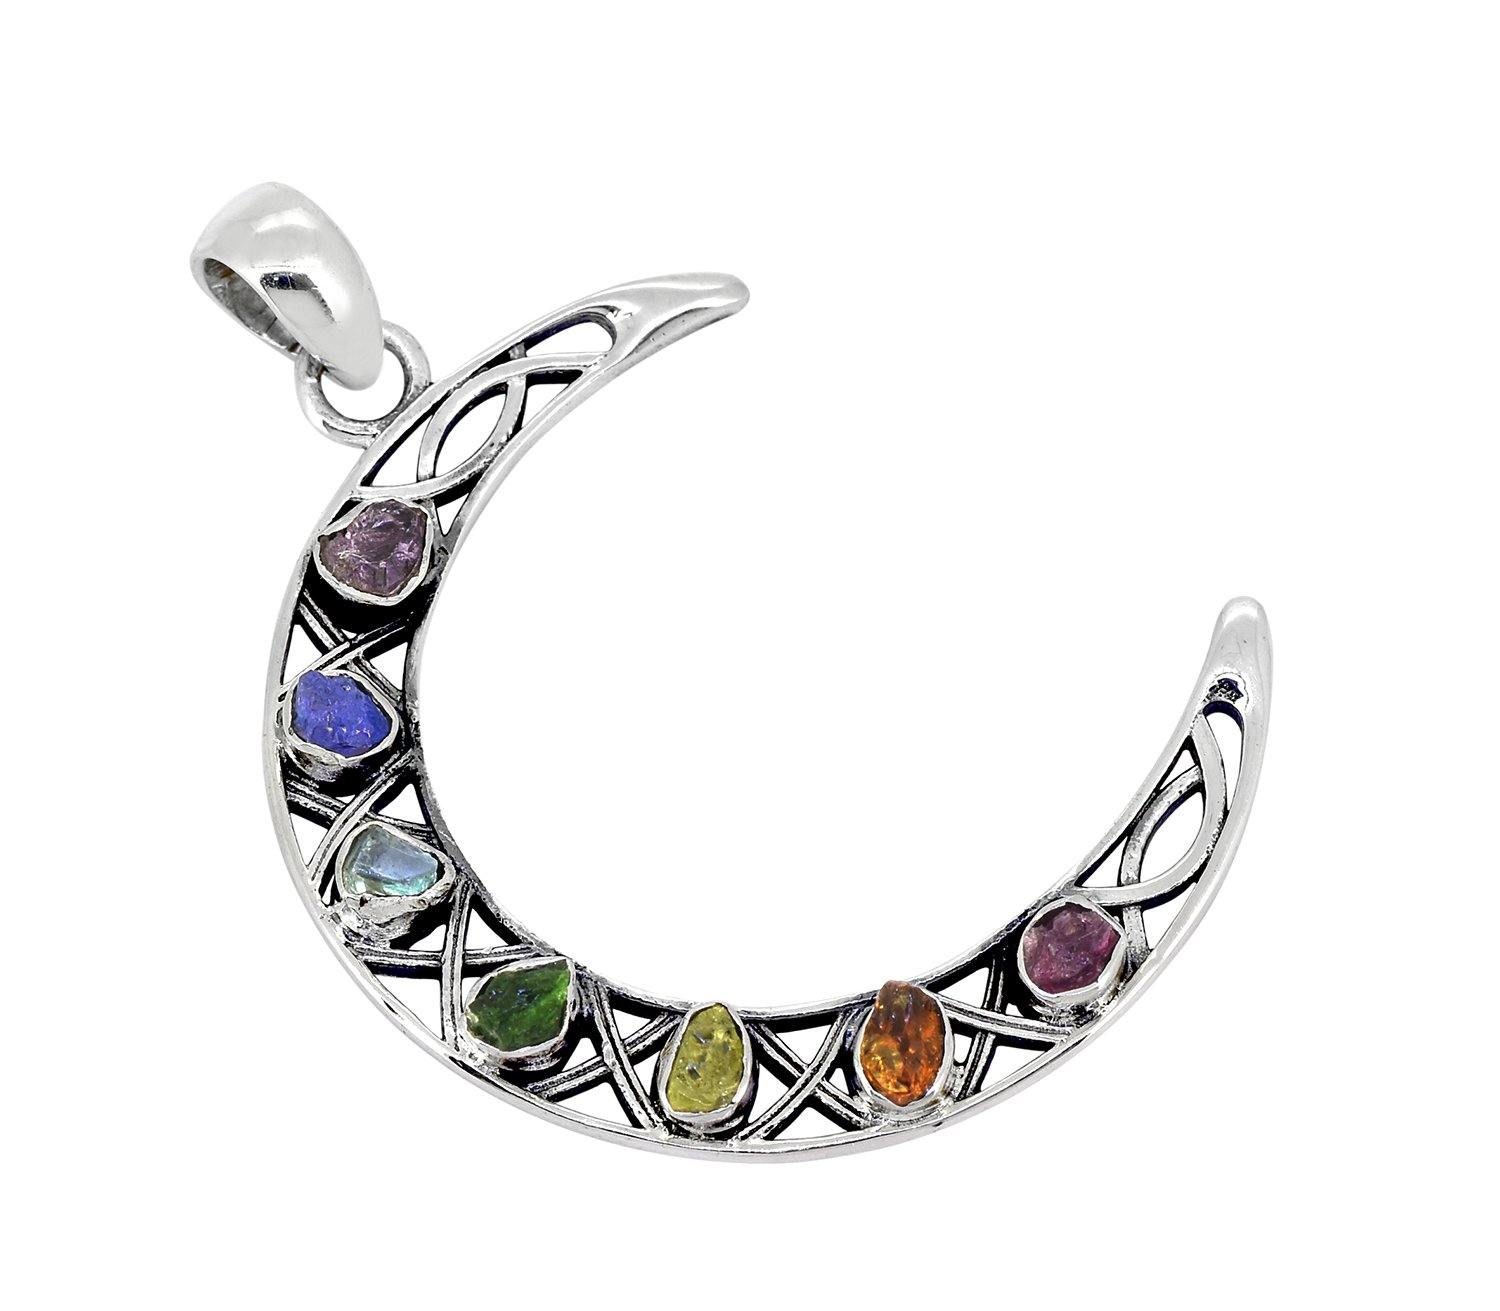 Rough Chakra Healing Stone Solid Sterling Silver Chain Crescent Moon Necklace Pendant Jewelry - YoTreasure